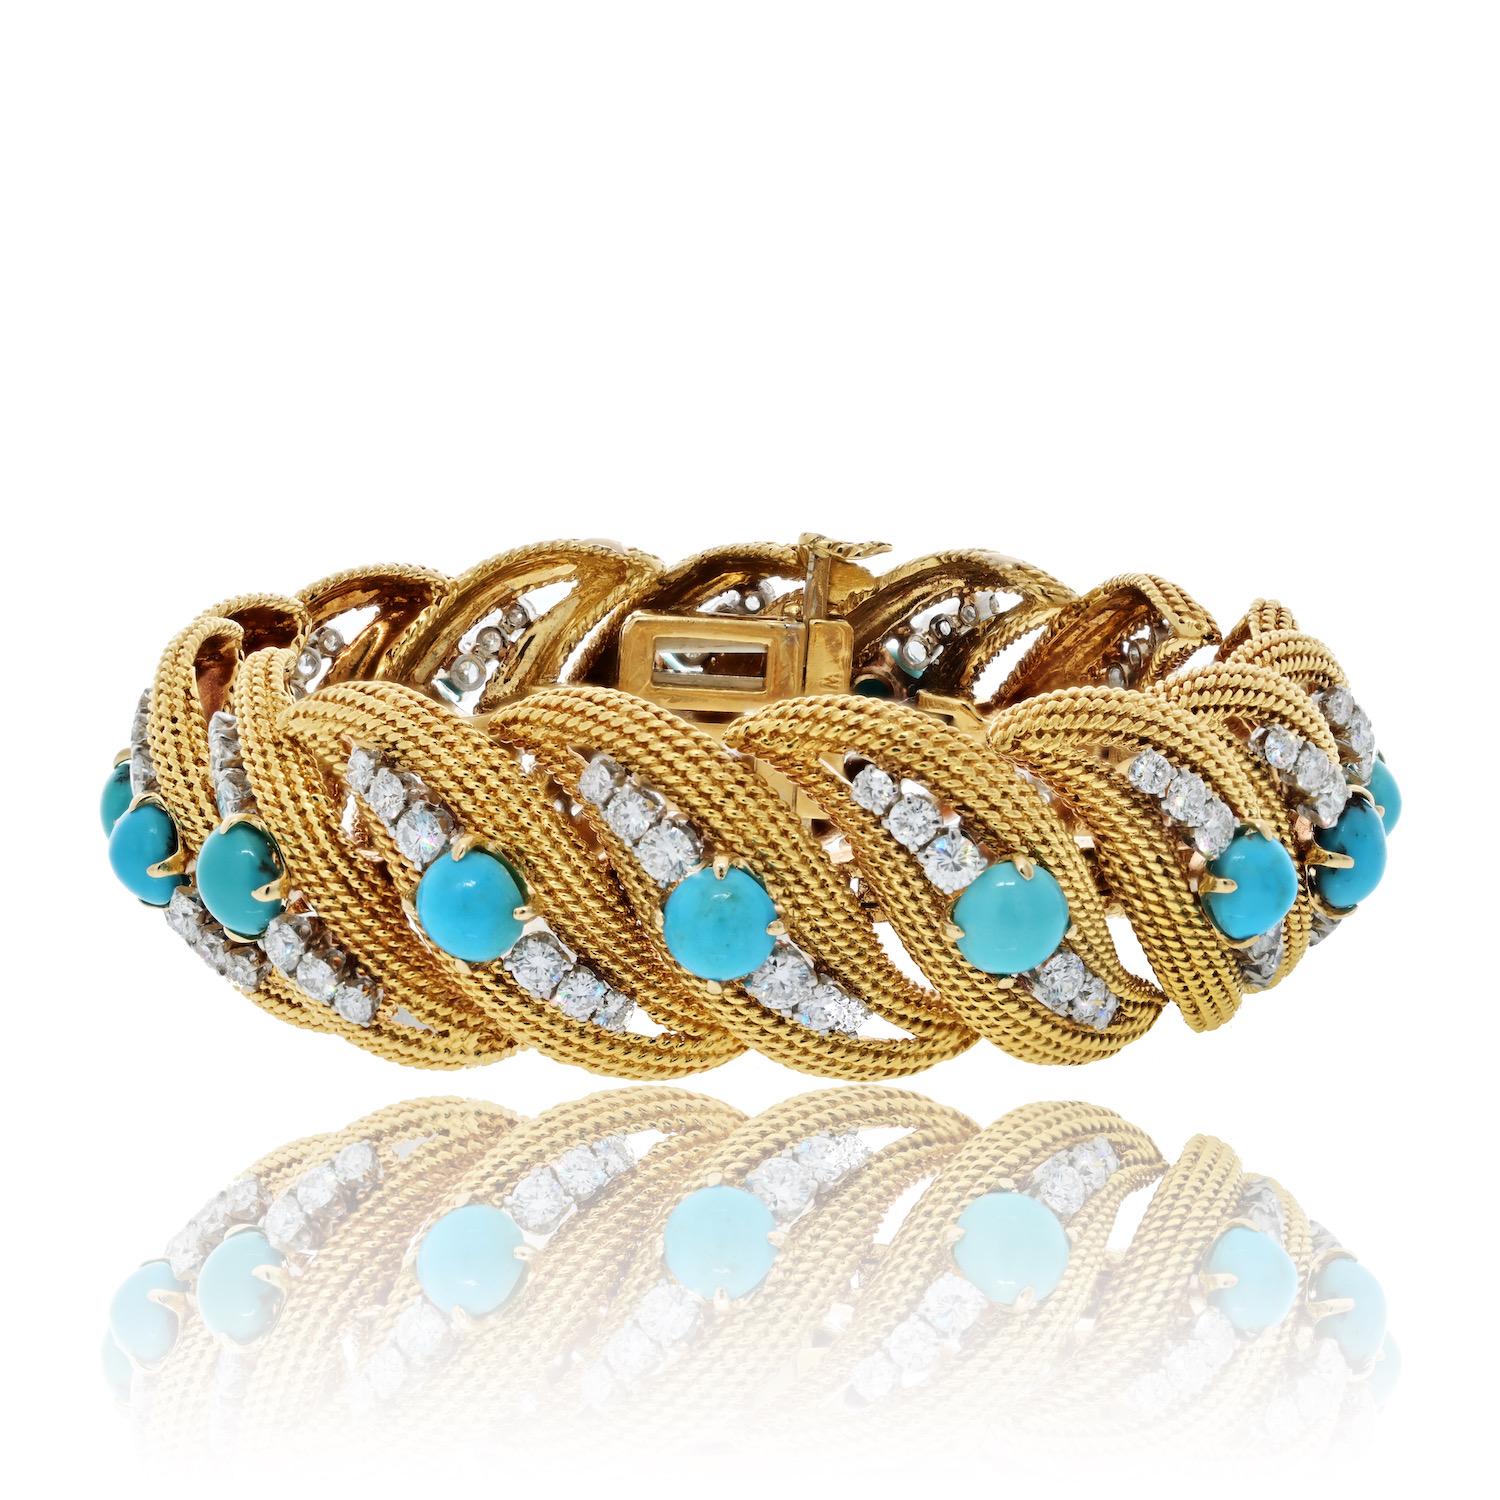 Vintage bracelet by David Webb crafted in 18K Yellow Gold set with turquoise and diamonds. 

Crafted in the 1980s, this bracelet exudes a timeless allure with its unique blend of materials and intricate detailing.

The bracelet features braided feel